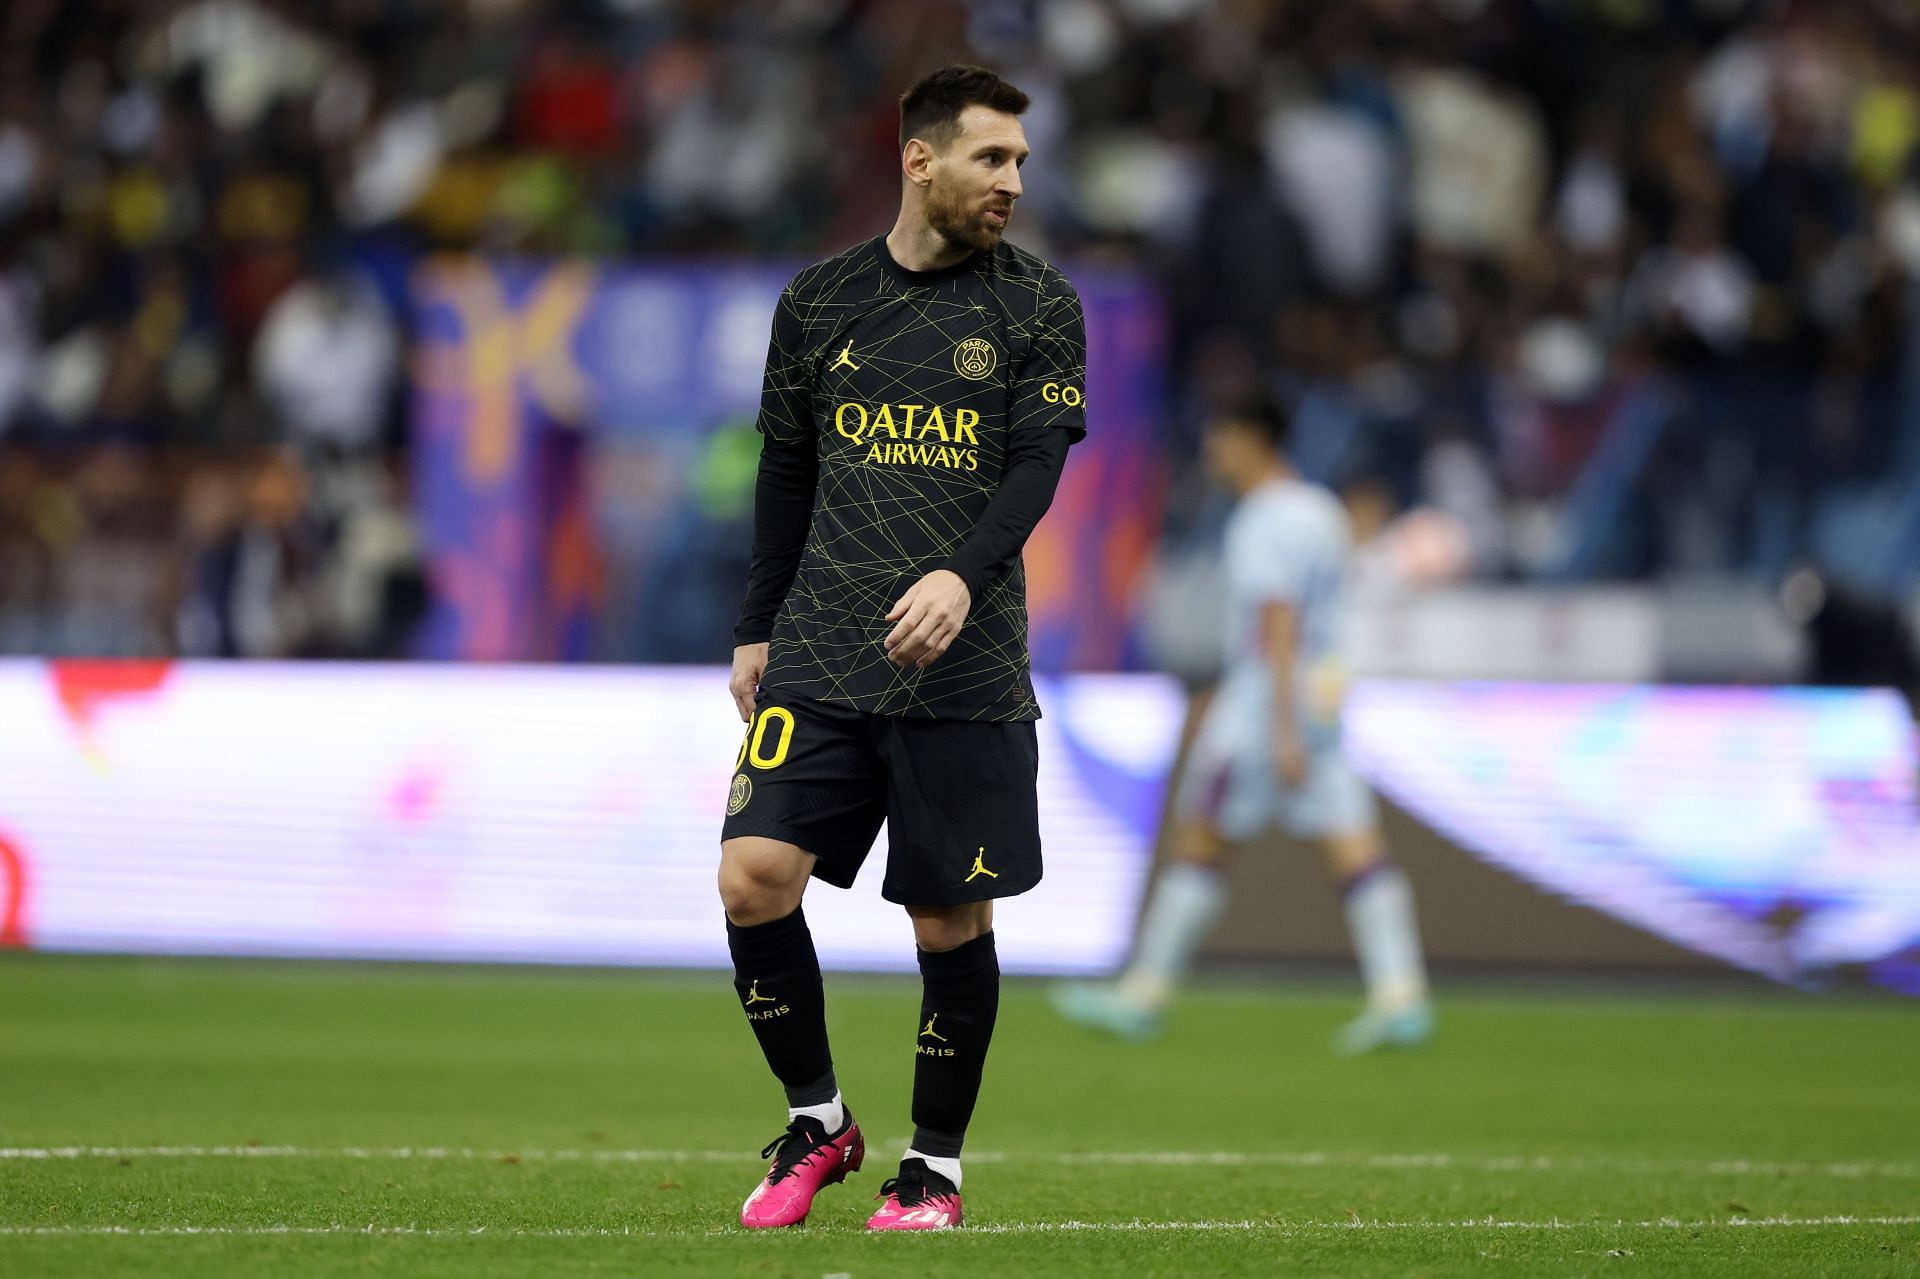 Lionel Messi missed the game against Monaco due to injury.